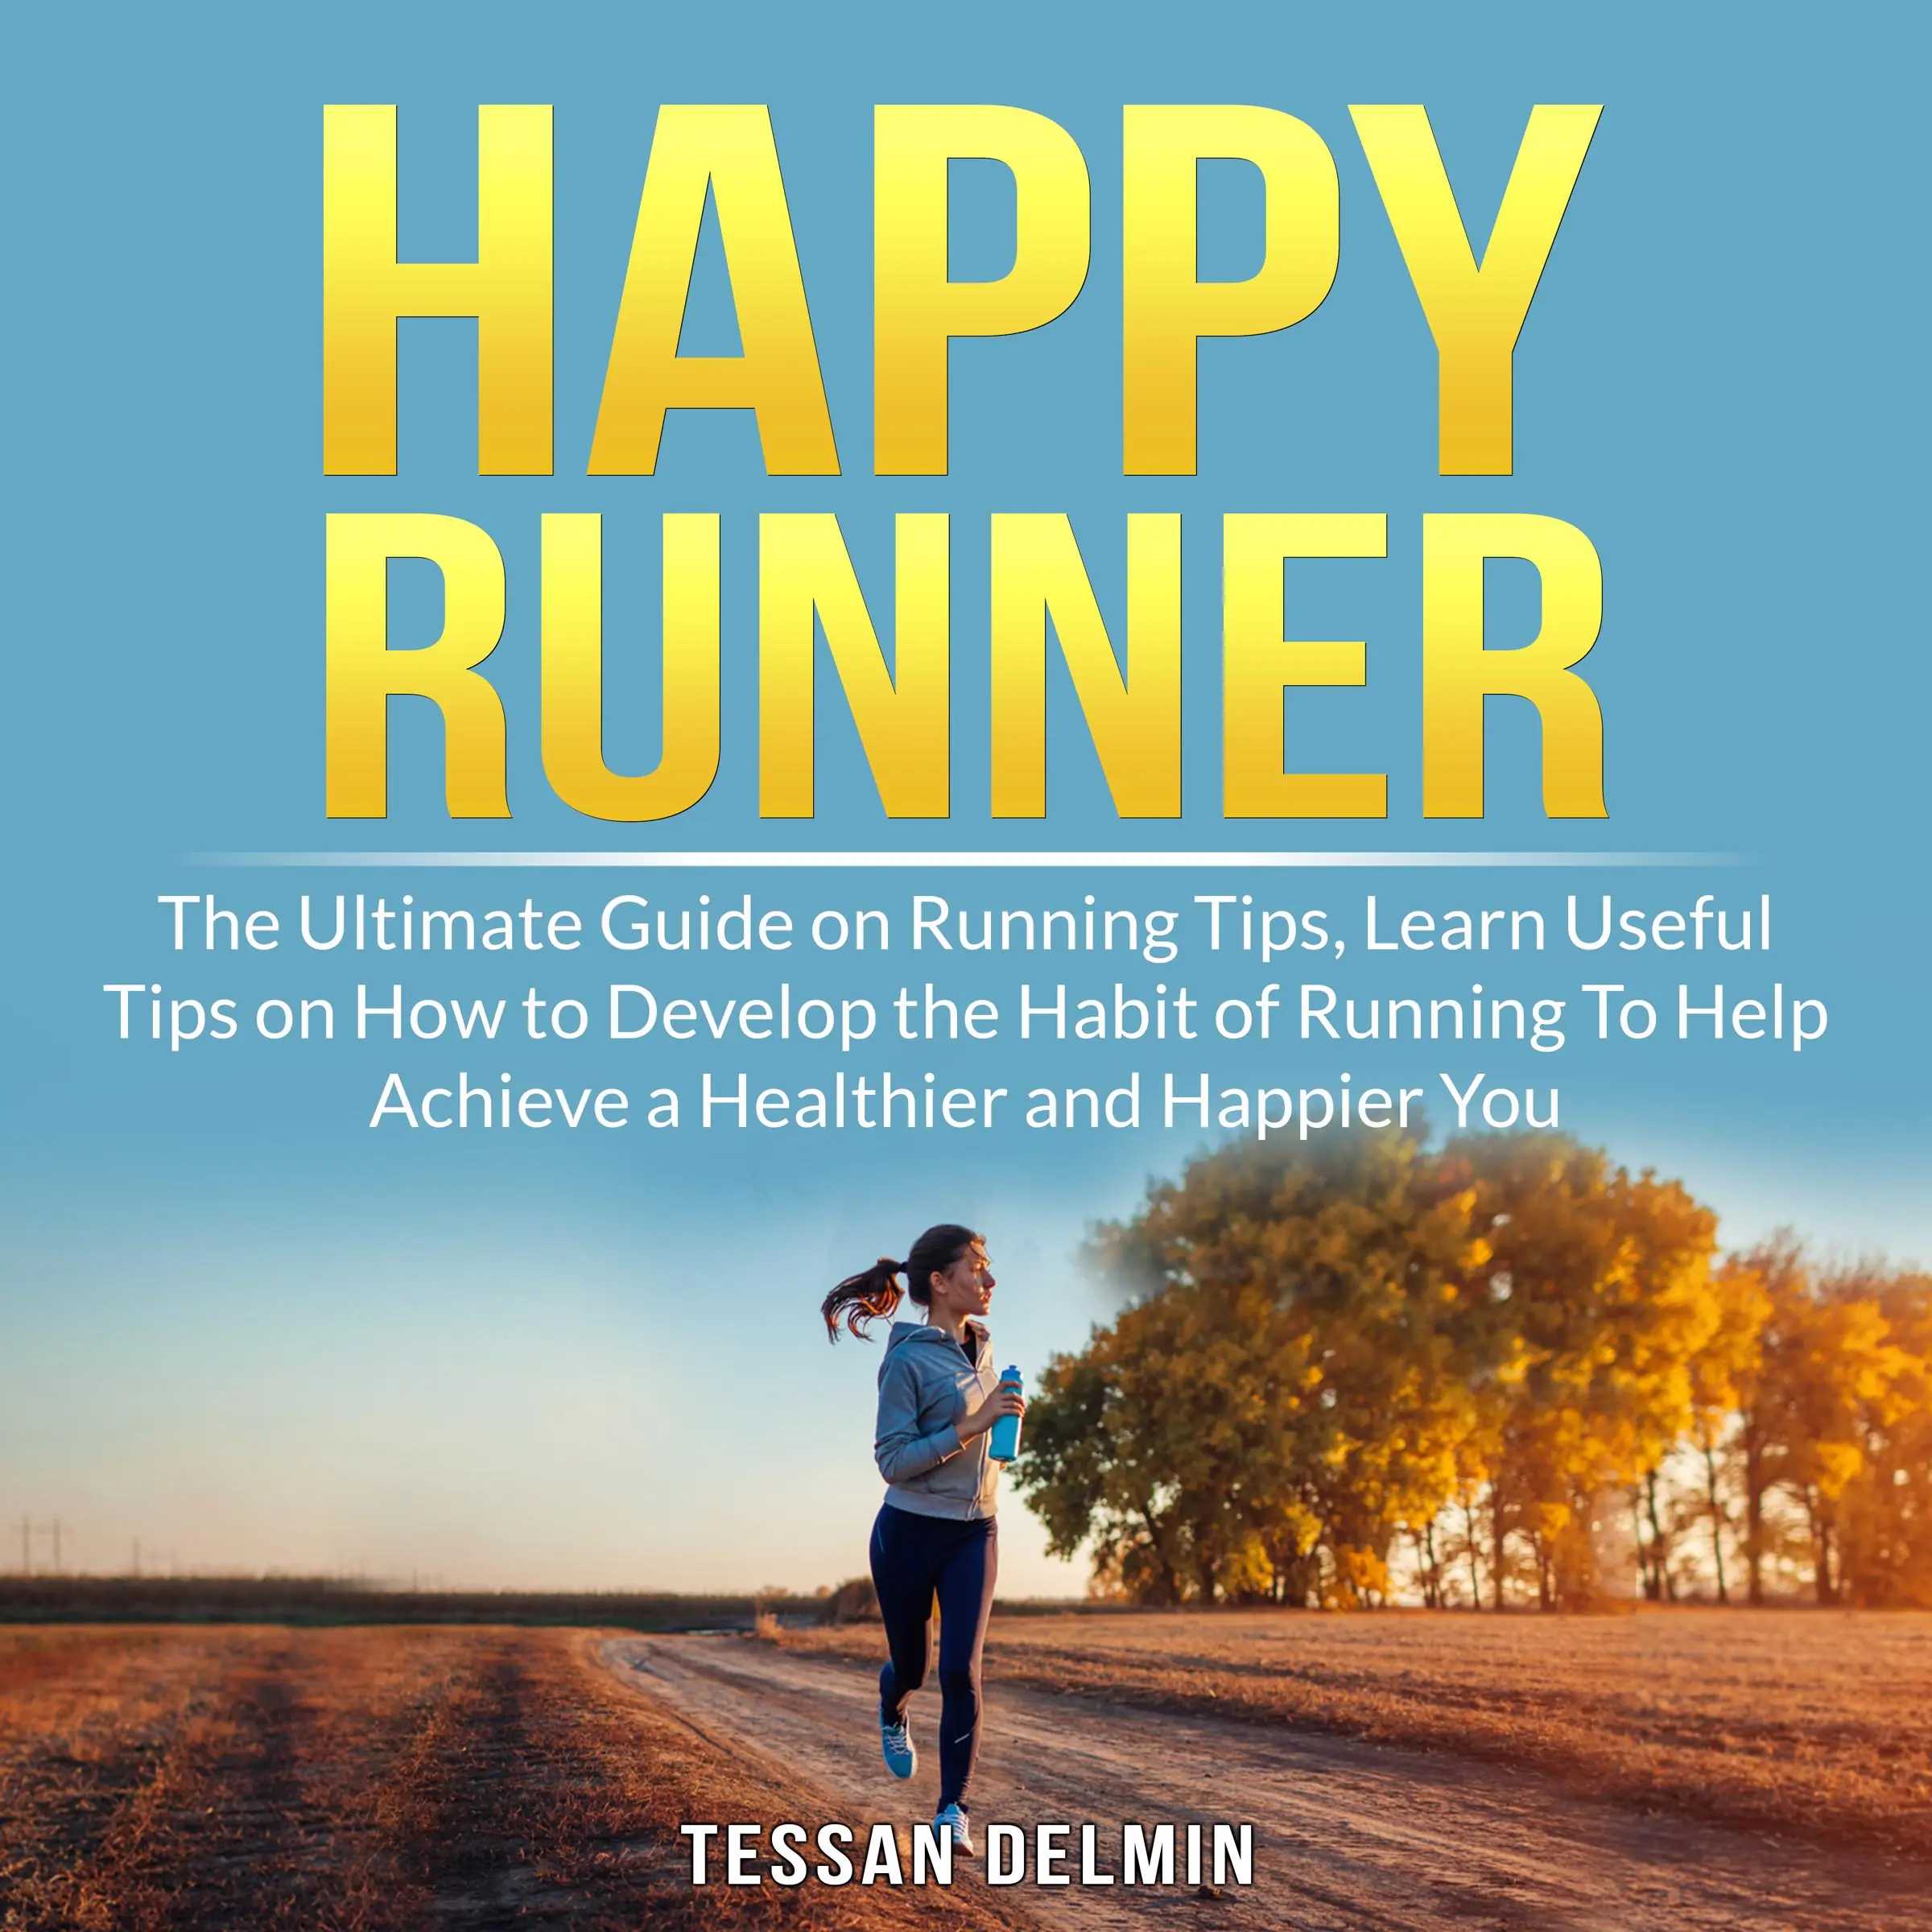 Happy Runner: The Ultimate Guide on Running Tips, Learn Useful Tips on How to Develop the Habit of Running To Help Achieve a Healthier and Happier You by Tessan Delmin Audiobook